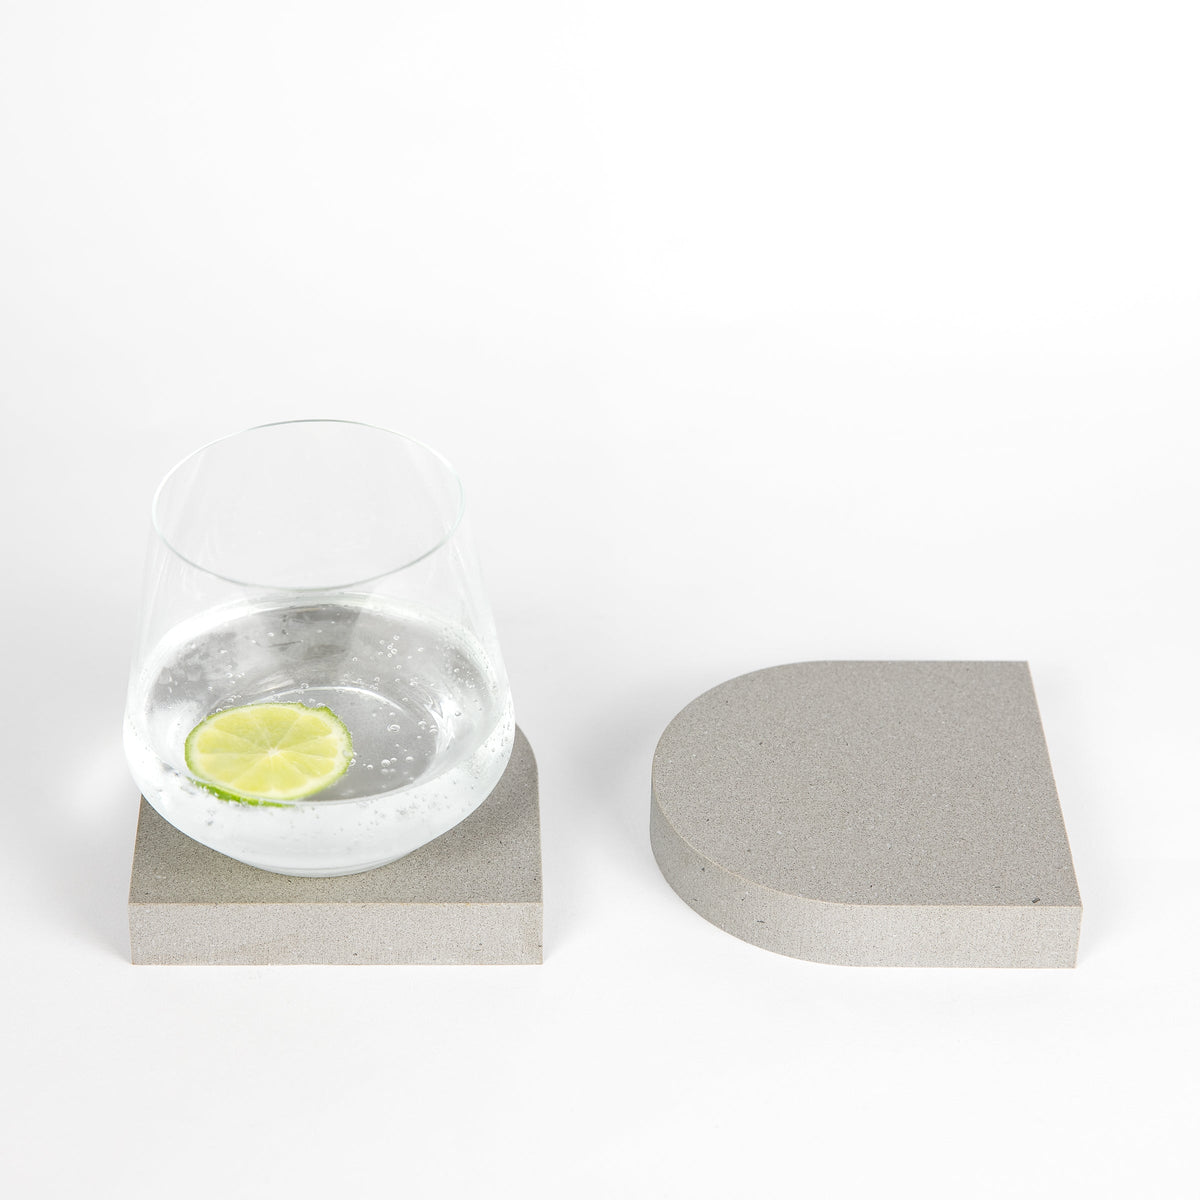 Grey arched stone quartz coasters in Sleek Concrete™ by Aureliia Collection Australia. These  grey quartz coasters have a cork backing. marble coasters in appearance however quartz has greater scratch resistance and is lower maintenance. caesarstone quartz  